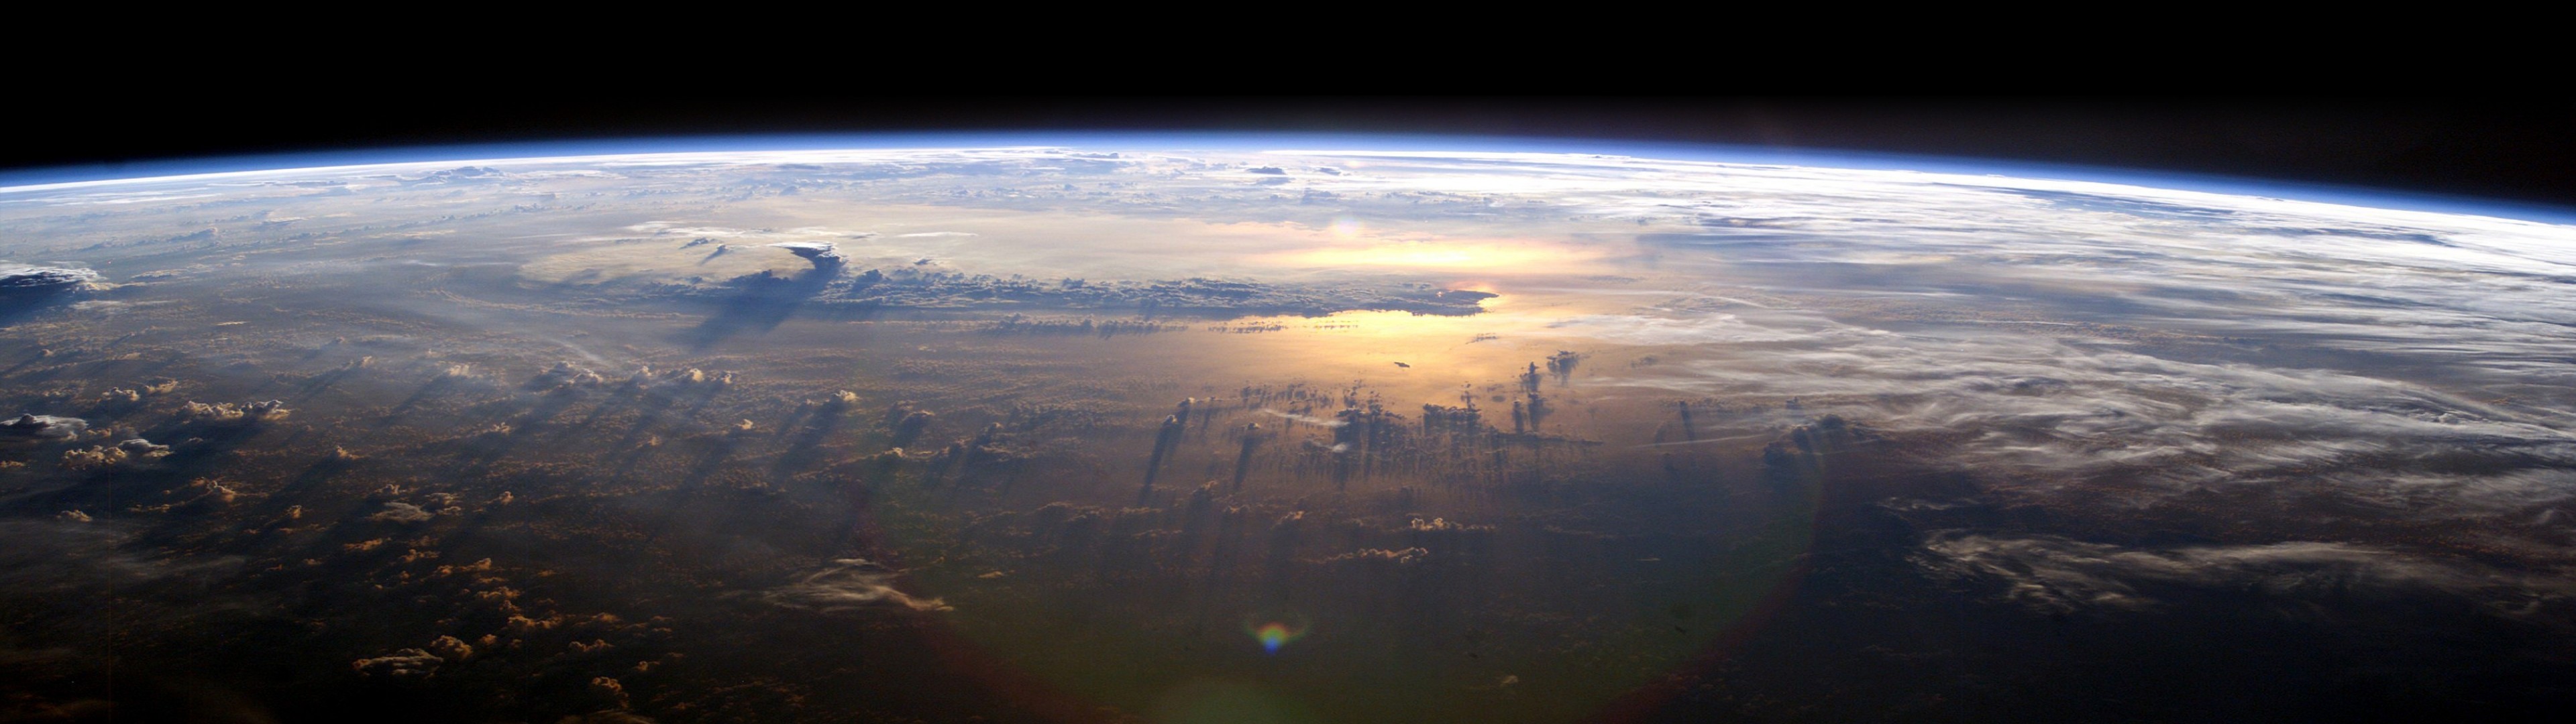 3840x1080 outer-space-earth-atmosphere-orbit--hd-wallpaper-